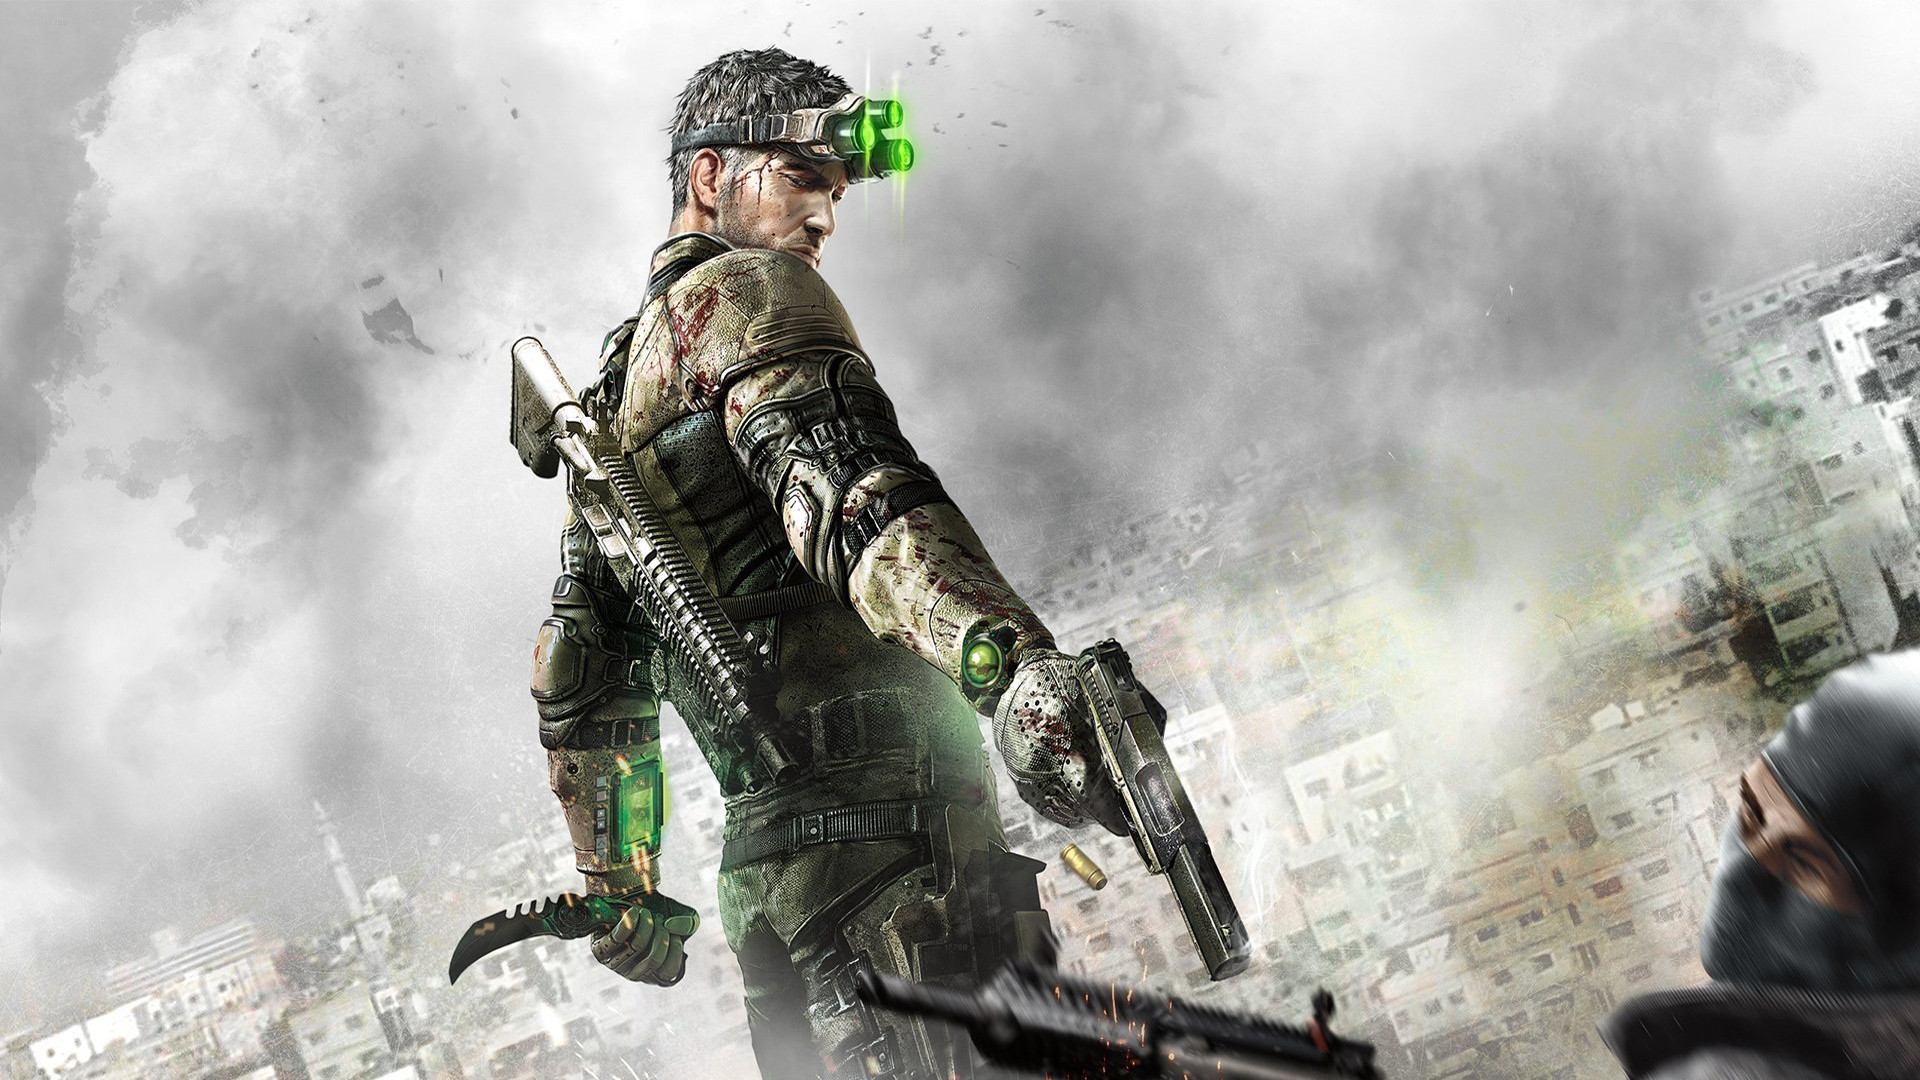 1920x1080 Splinter Cell Wallpapers For Android